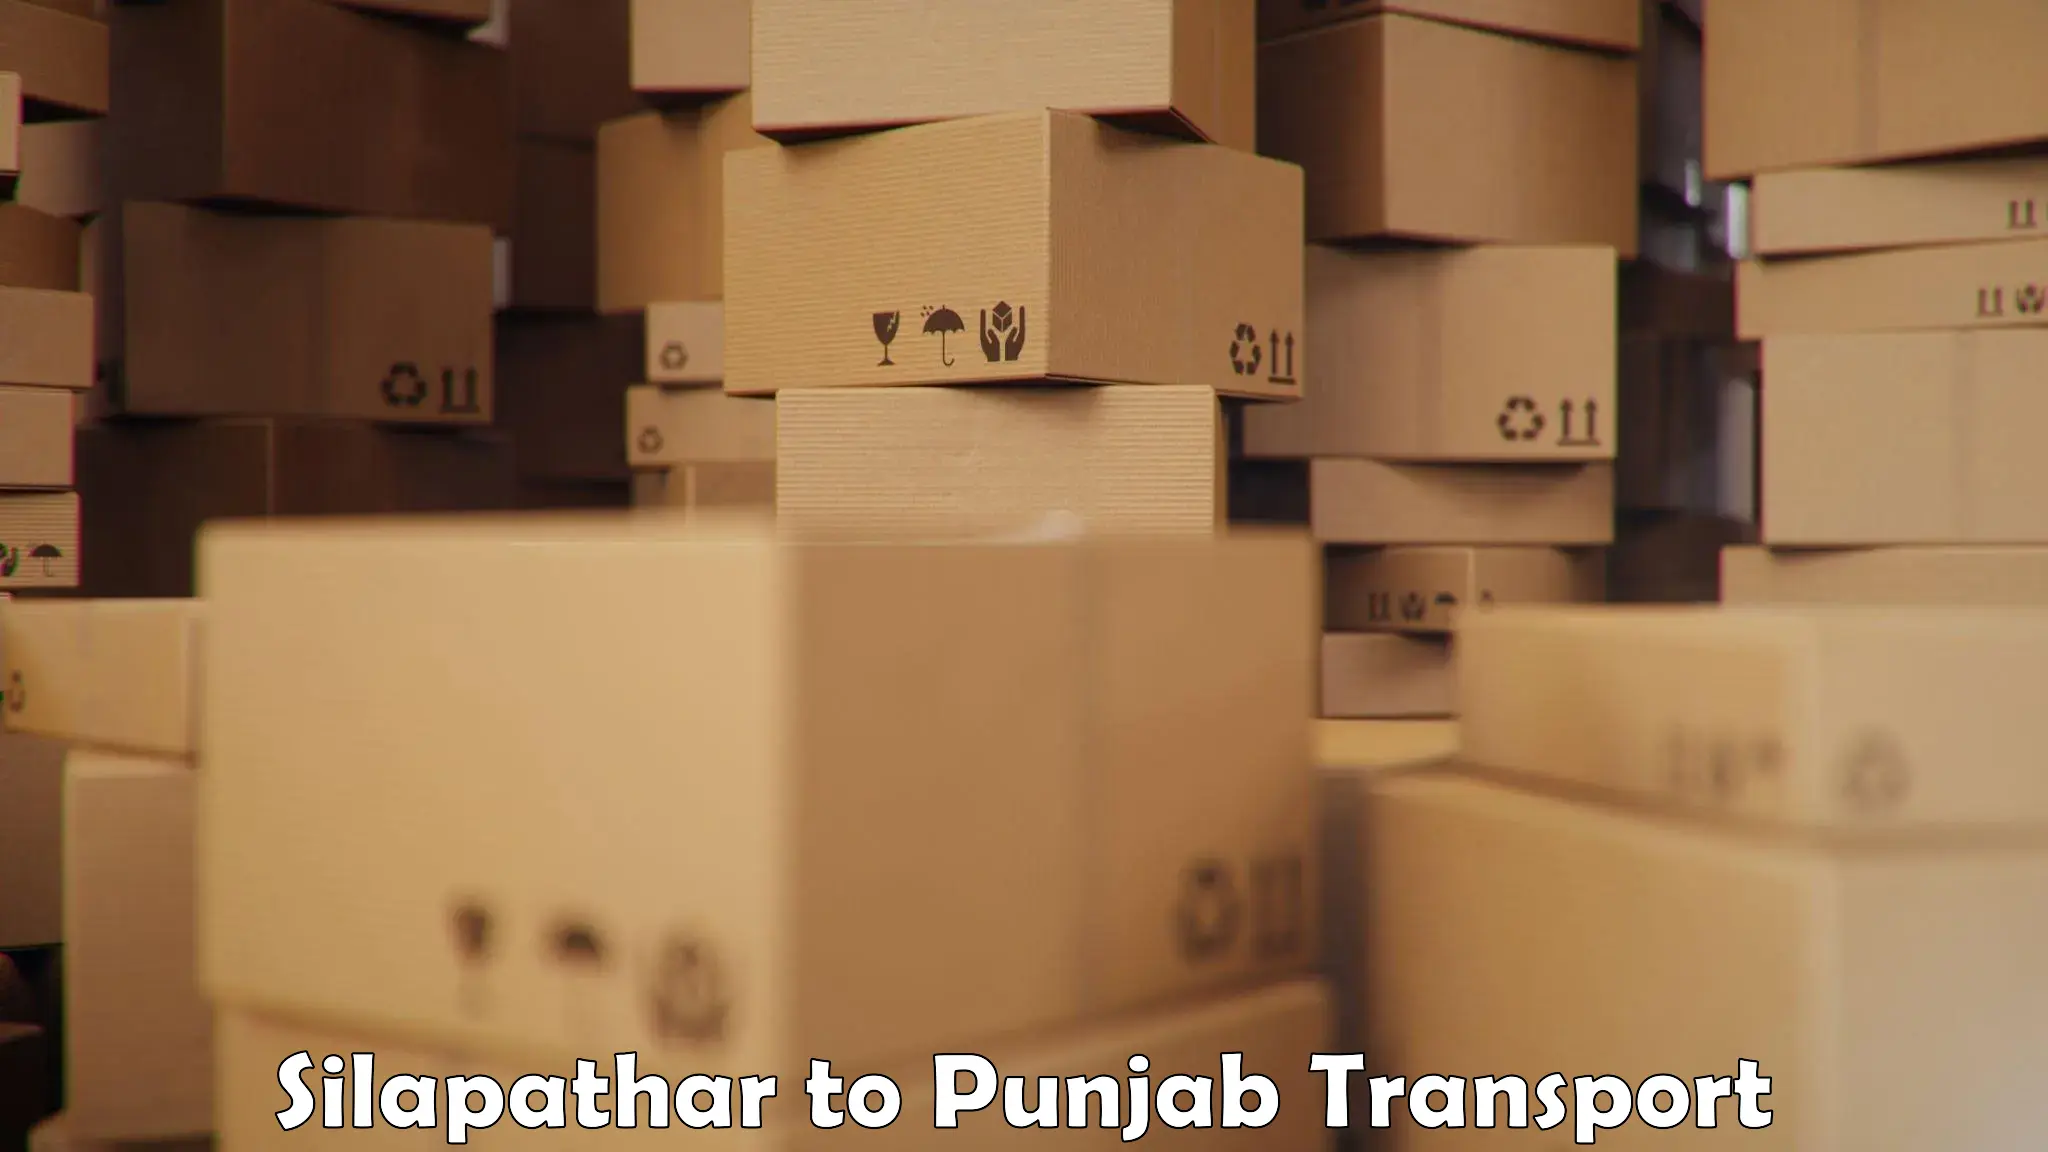 Nearby transport service Silapathar to Punjab